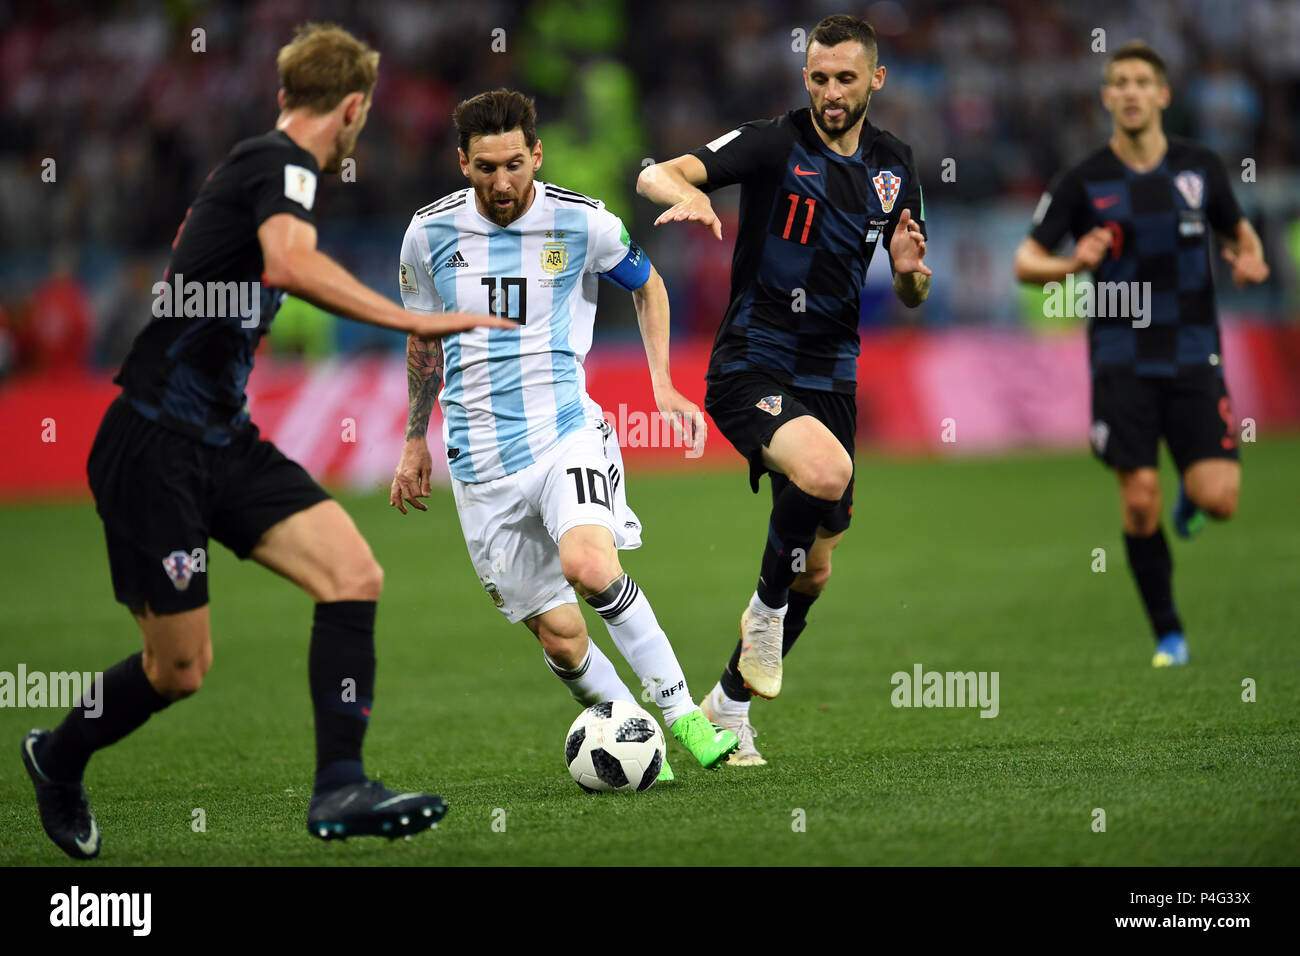 Nizhny Novgorod, Russia. 21st June, 2018. World Cup, Argentina vs Croatia, preliminary round, Group D, 2nd match day in the Nizhny Novgorod Stadium. Lionel Messi (center left) from Argentina and Marcelo Brozovic (center right) from Croatia in action. Credit: Andreas Gebert/dpa/Alamy Live News Stock Photo